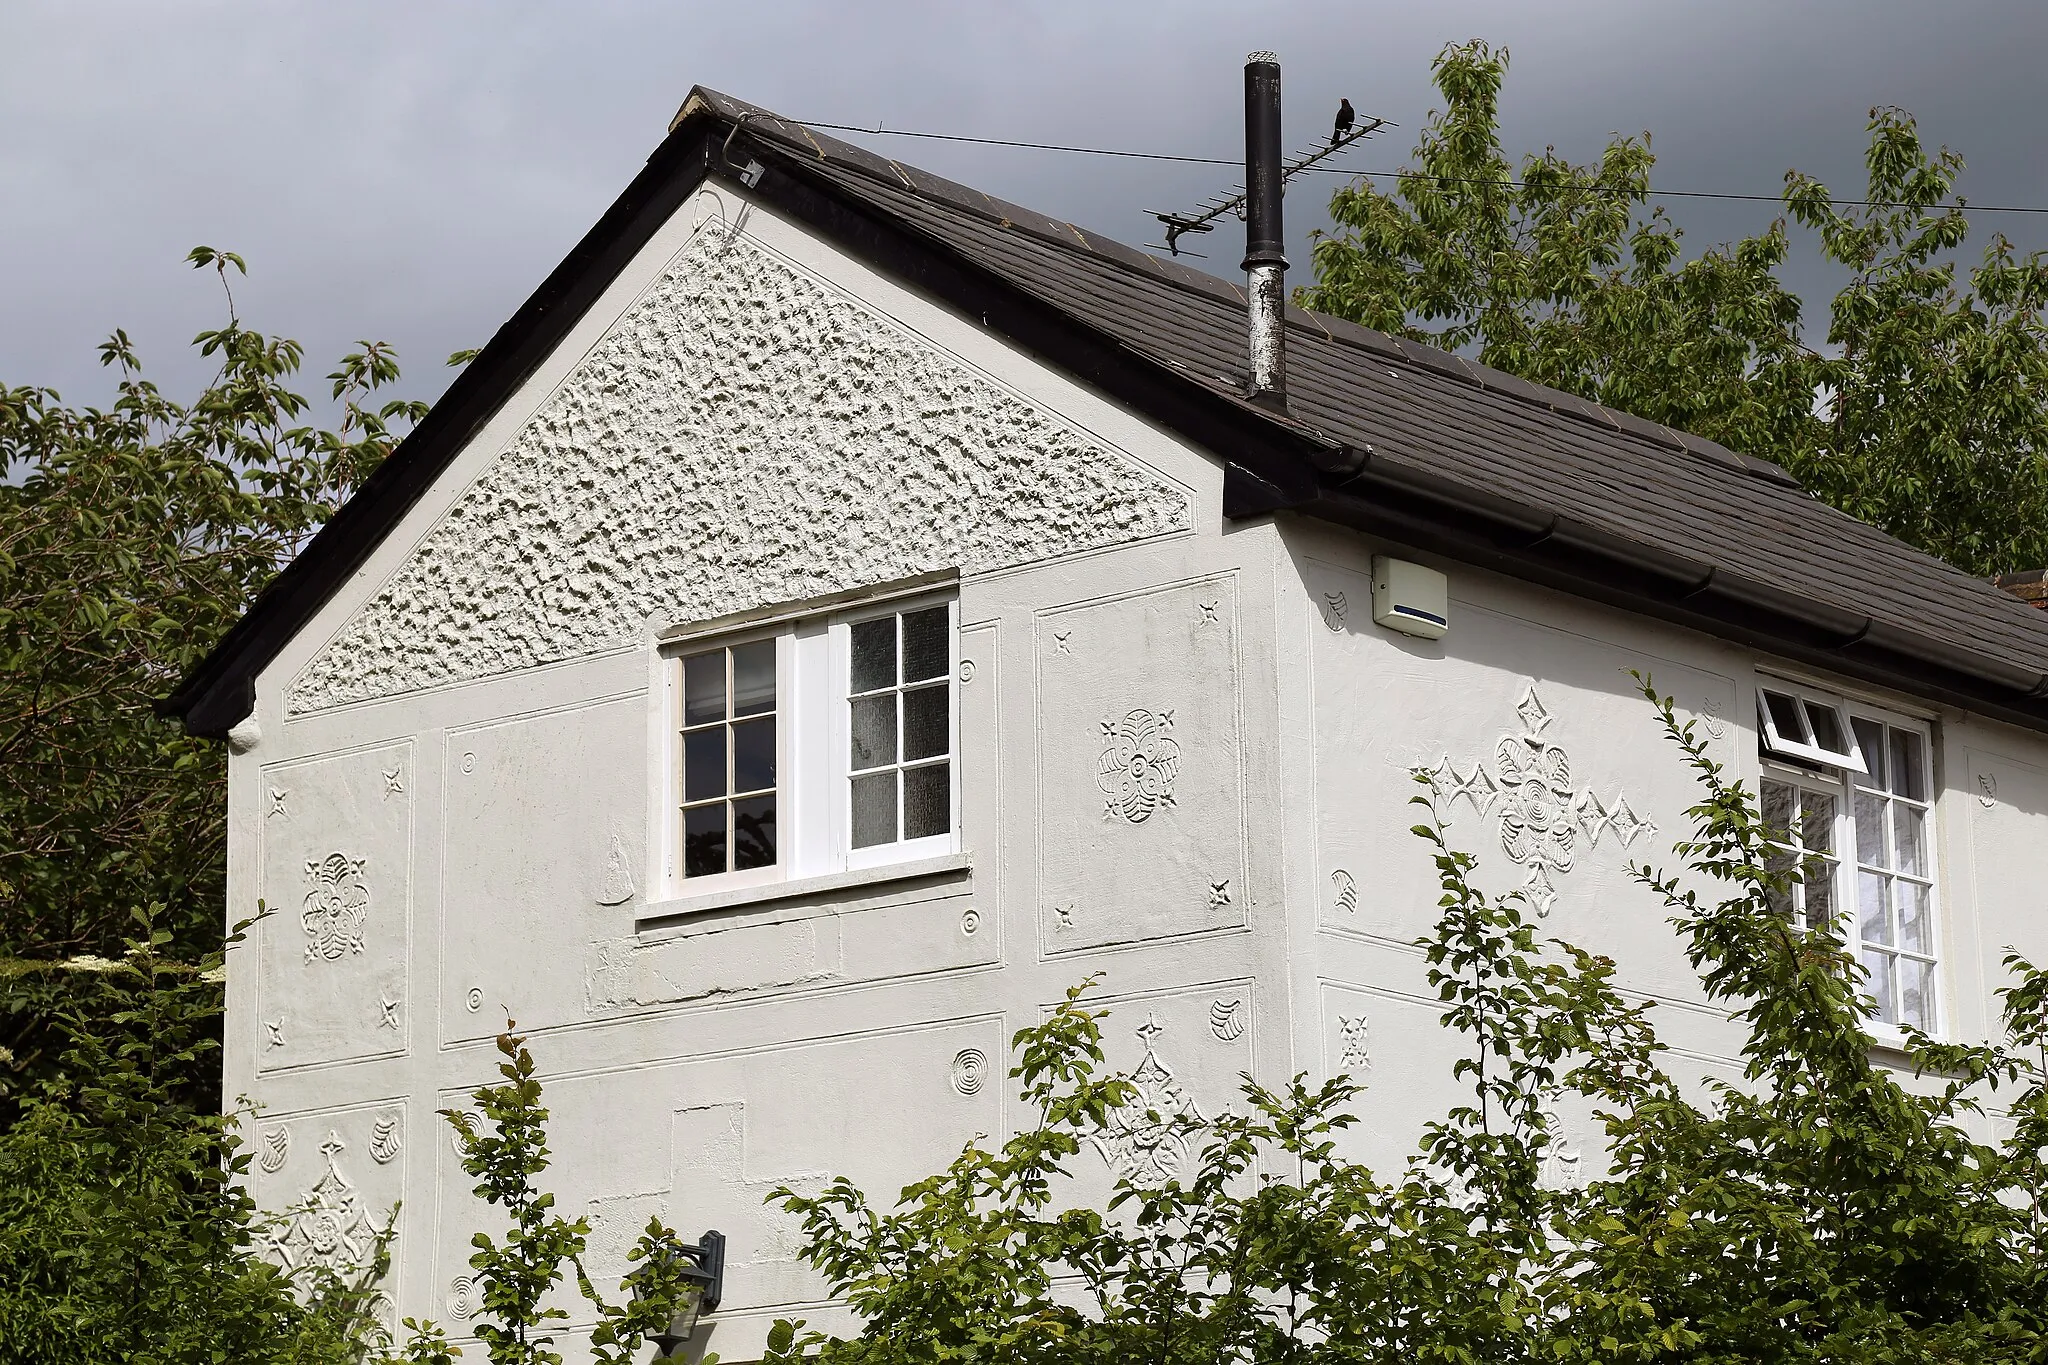 Photo showing: Pargetting on a house onChelmsford Road in Great Waltham village, Essex, England